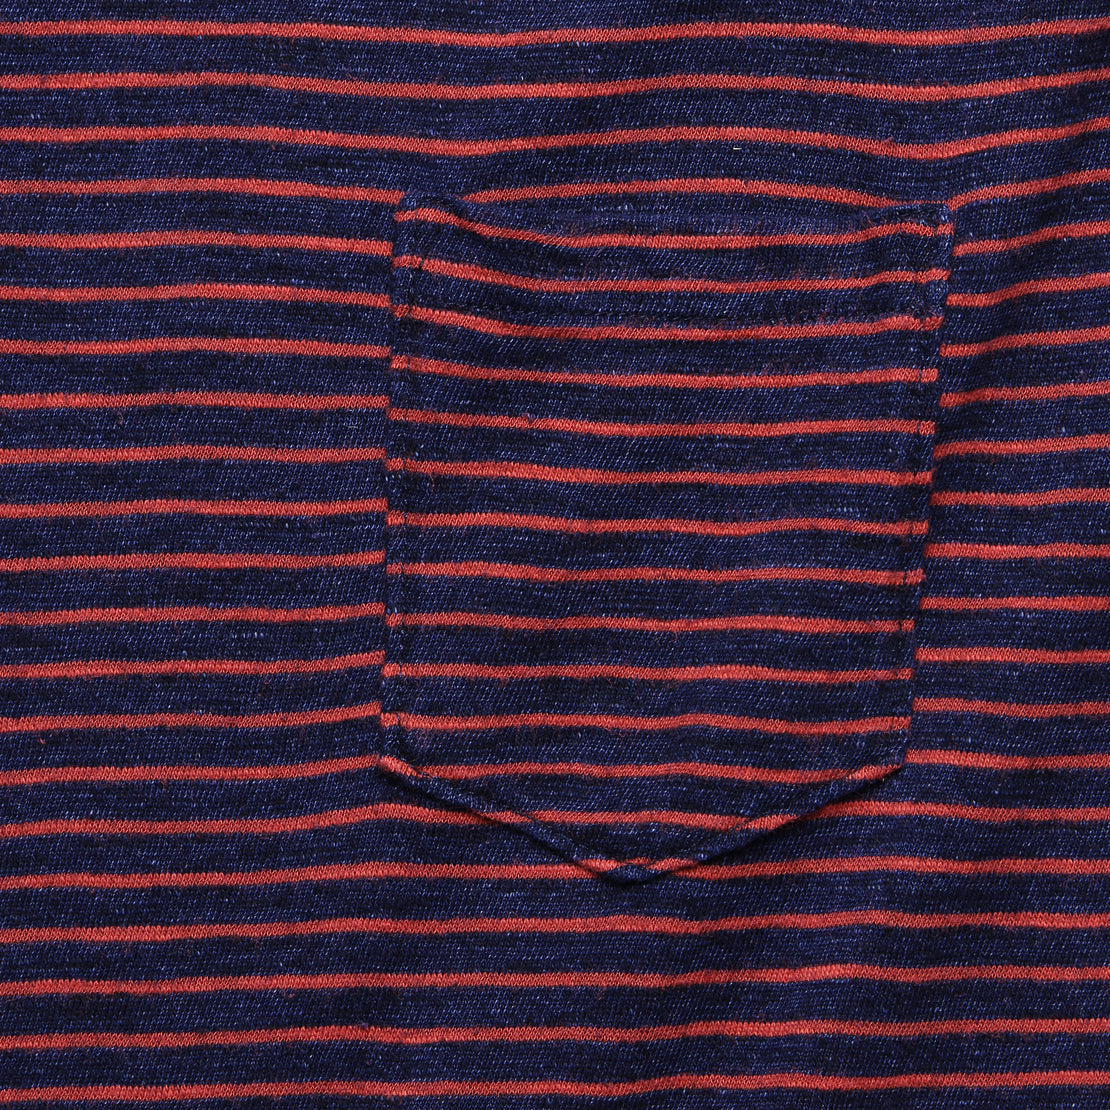 Thin Stripe Pocket Tee - Indigo/Red - Alex Mill - STAG Provisions - Tops - S/S Tee